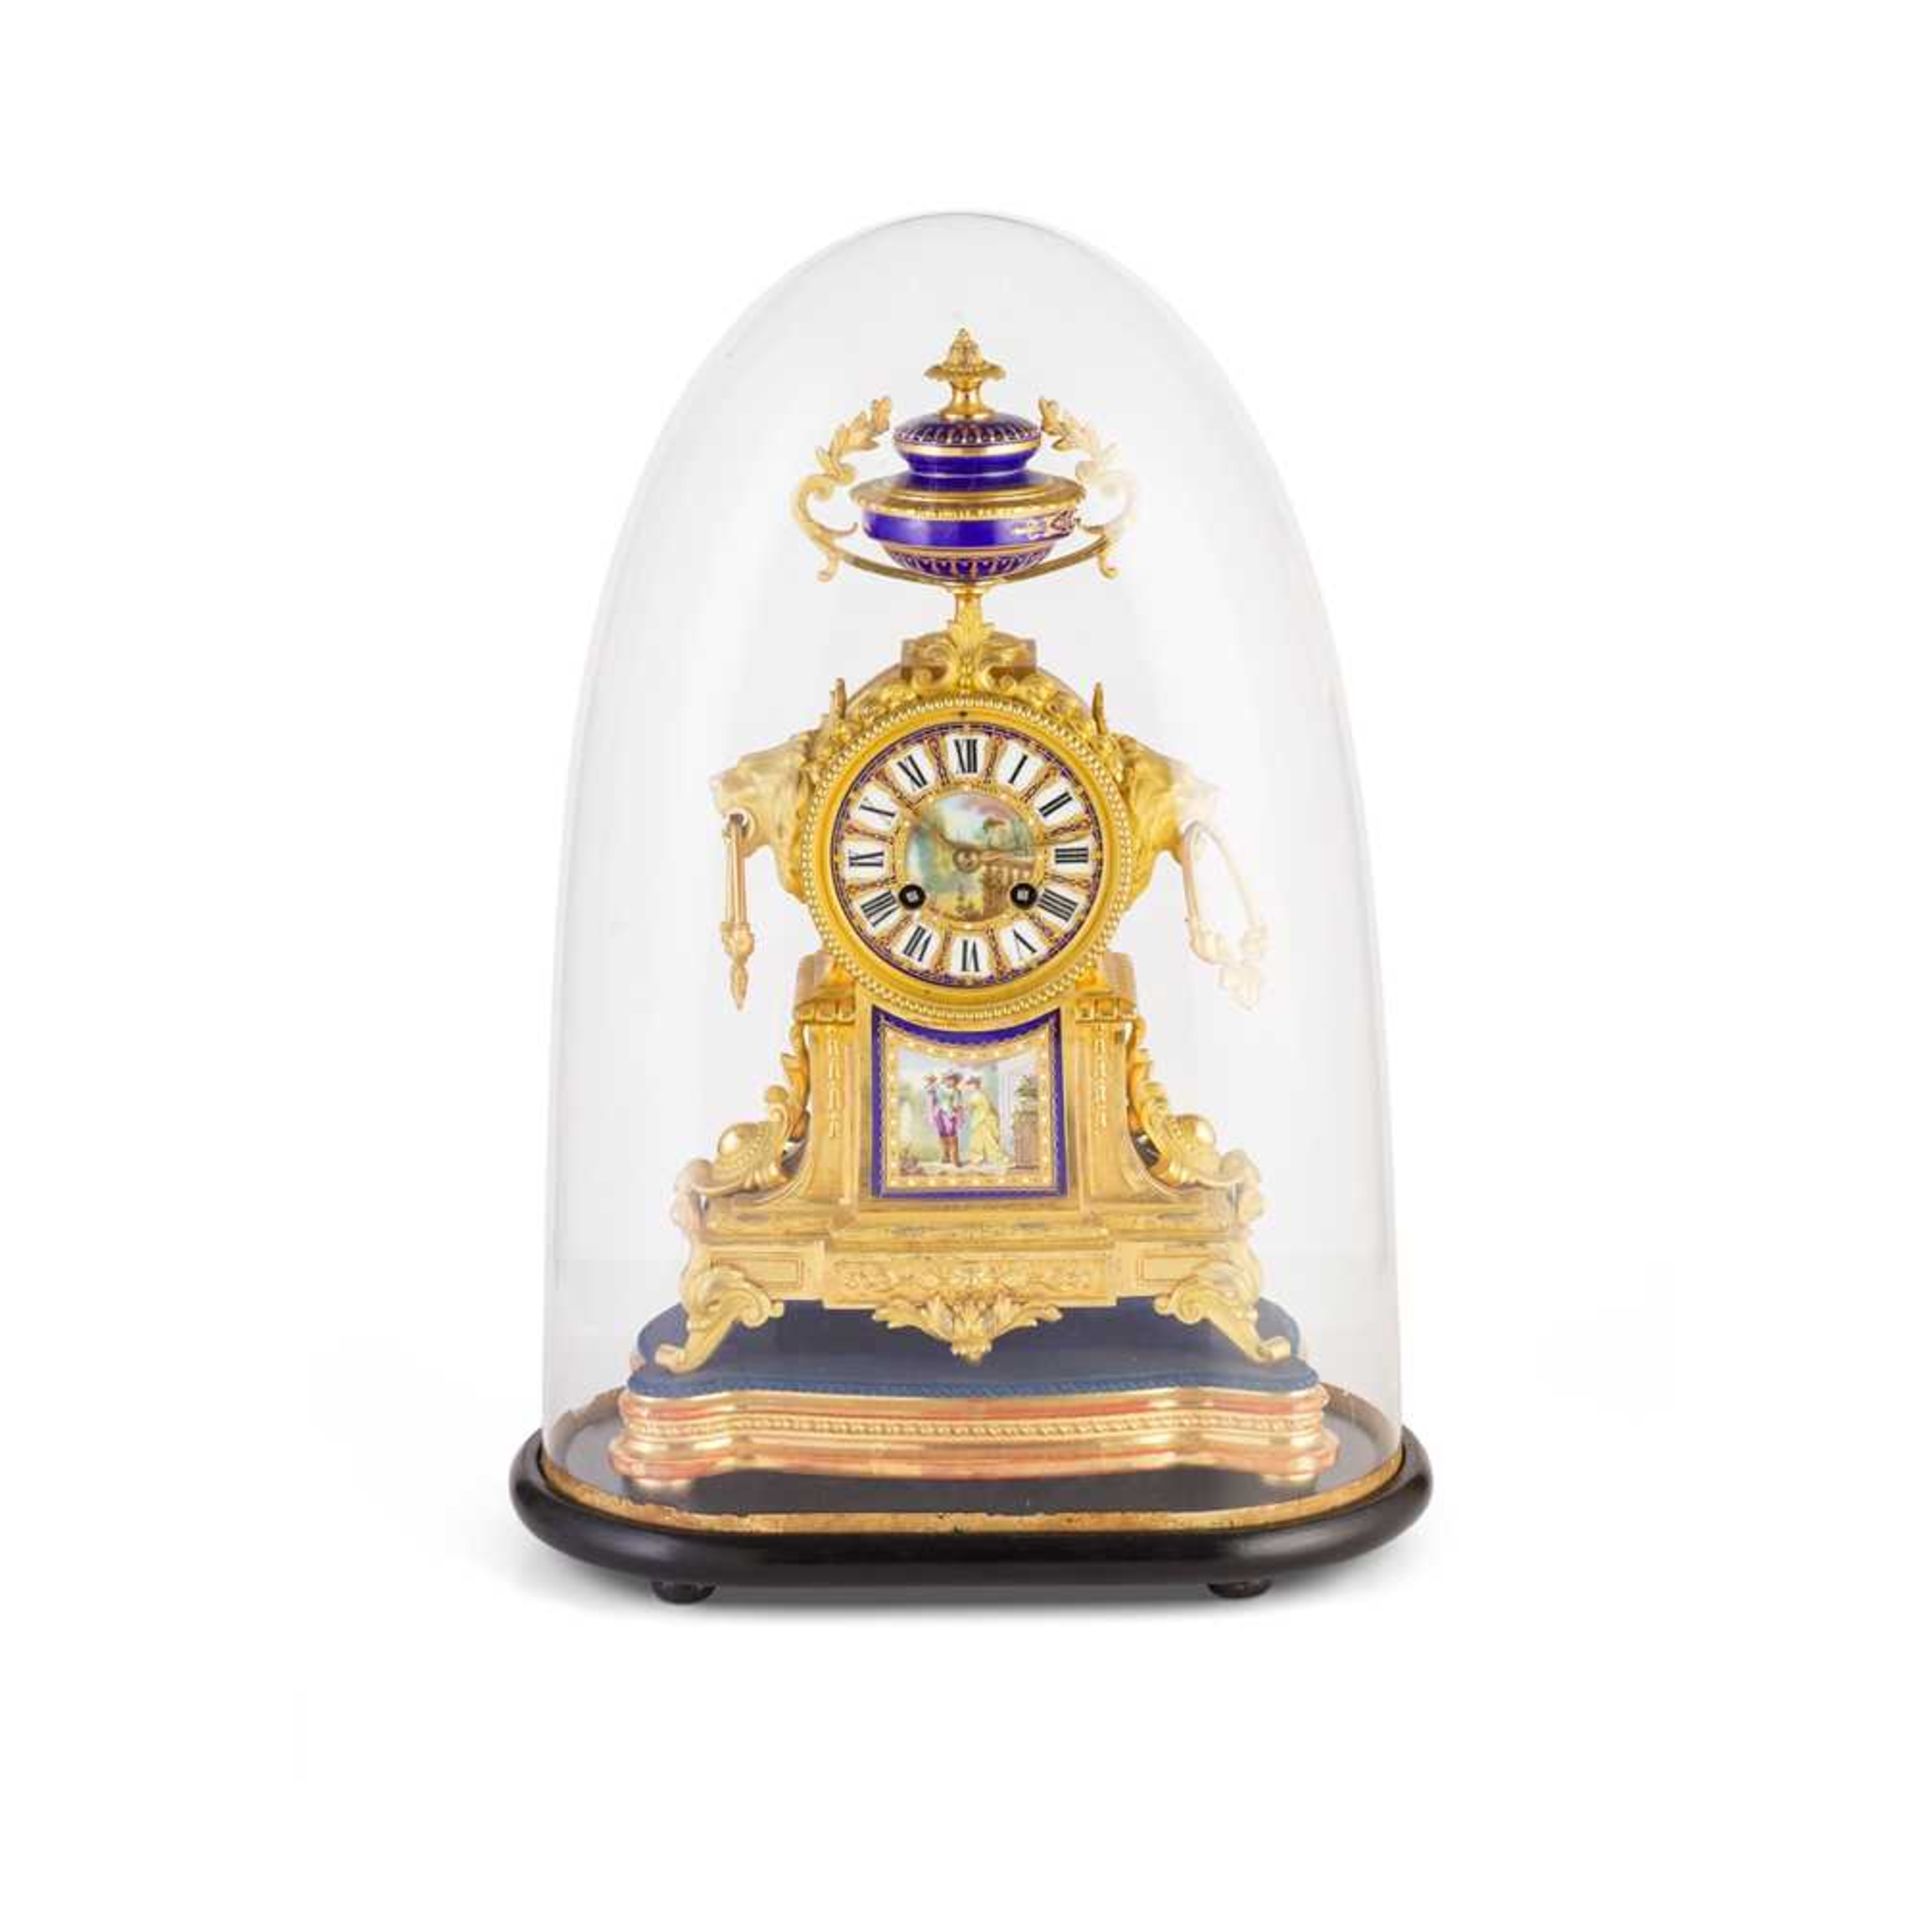 FRENCH GILT METAL AND PORCELAIN MOUNTED MANTEL CLOCK 19TH CENTURY